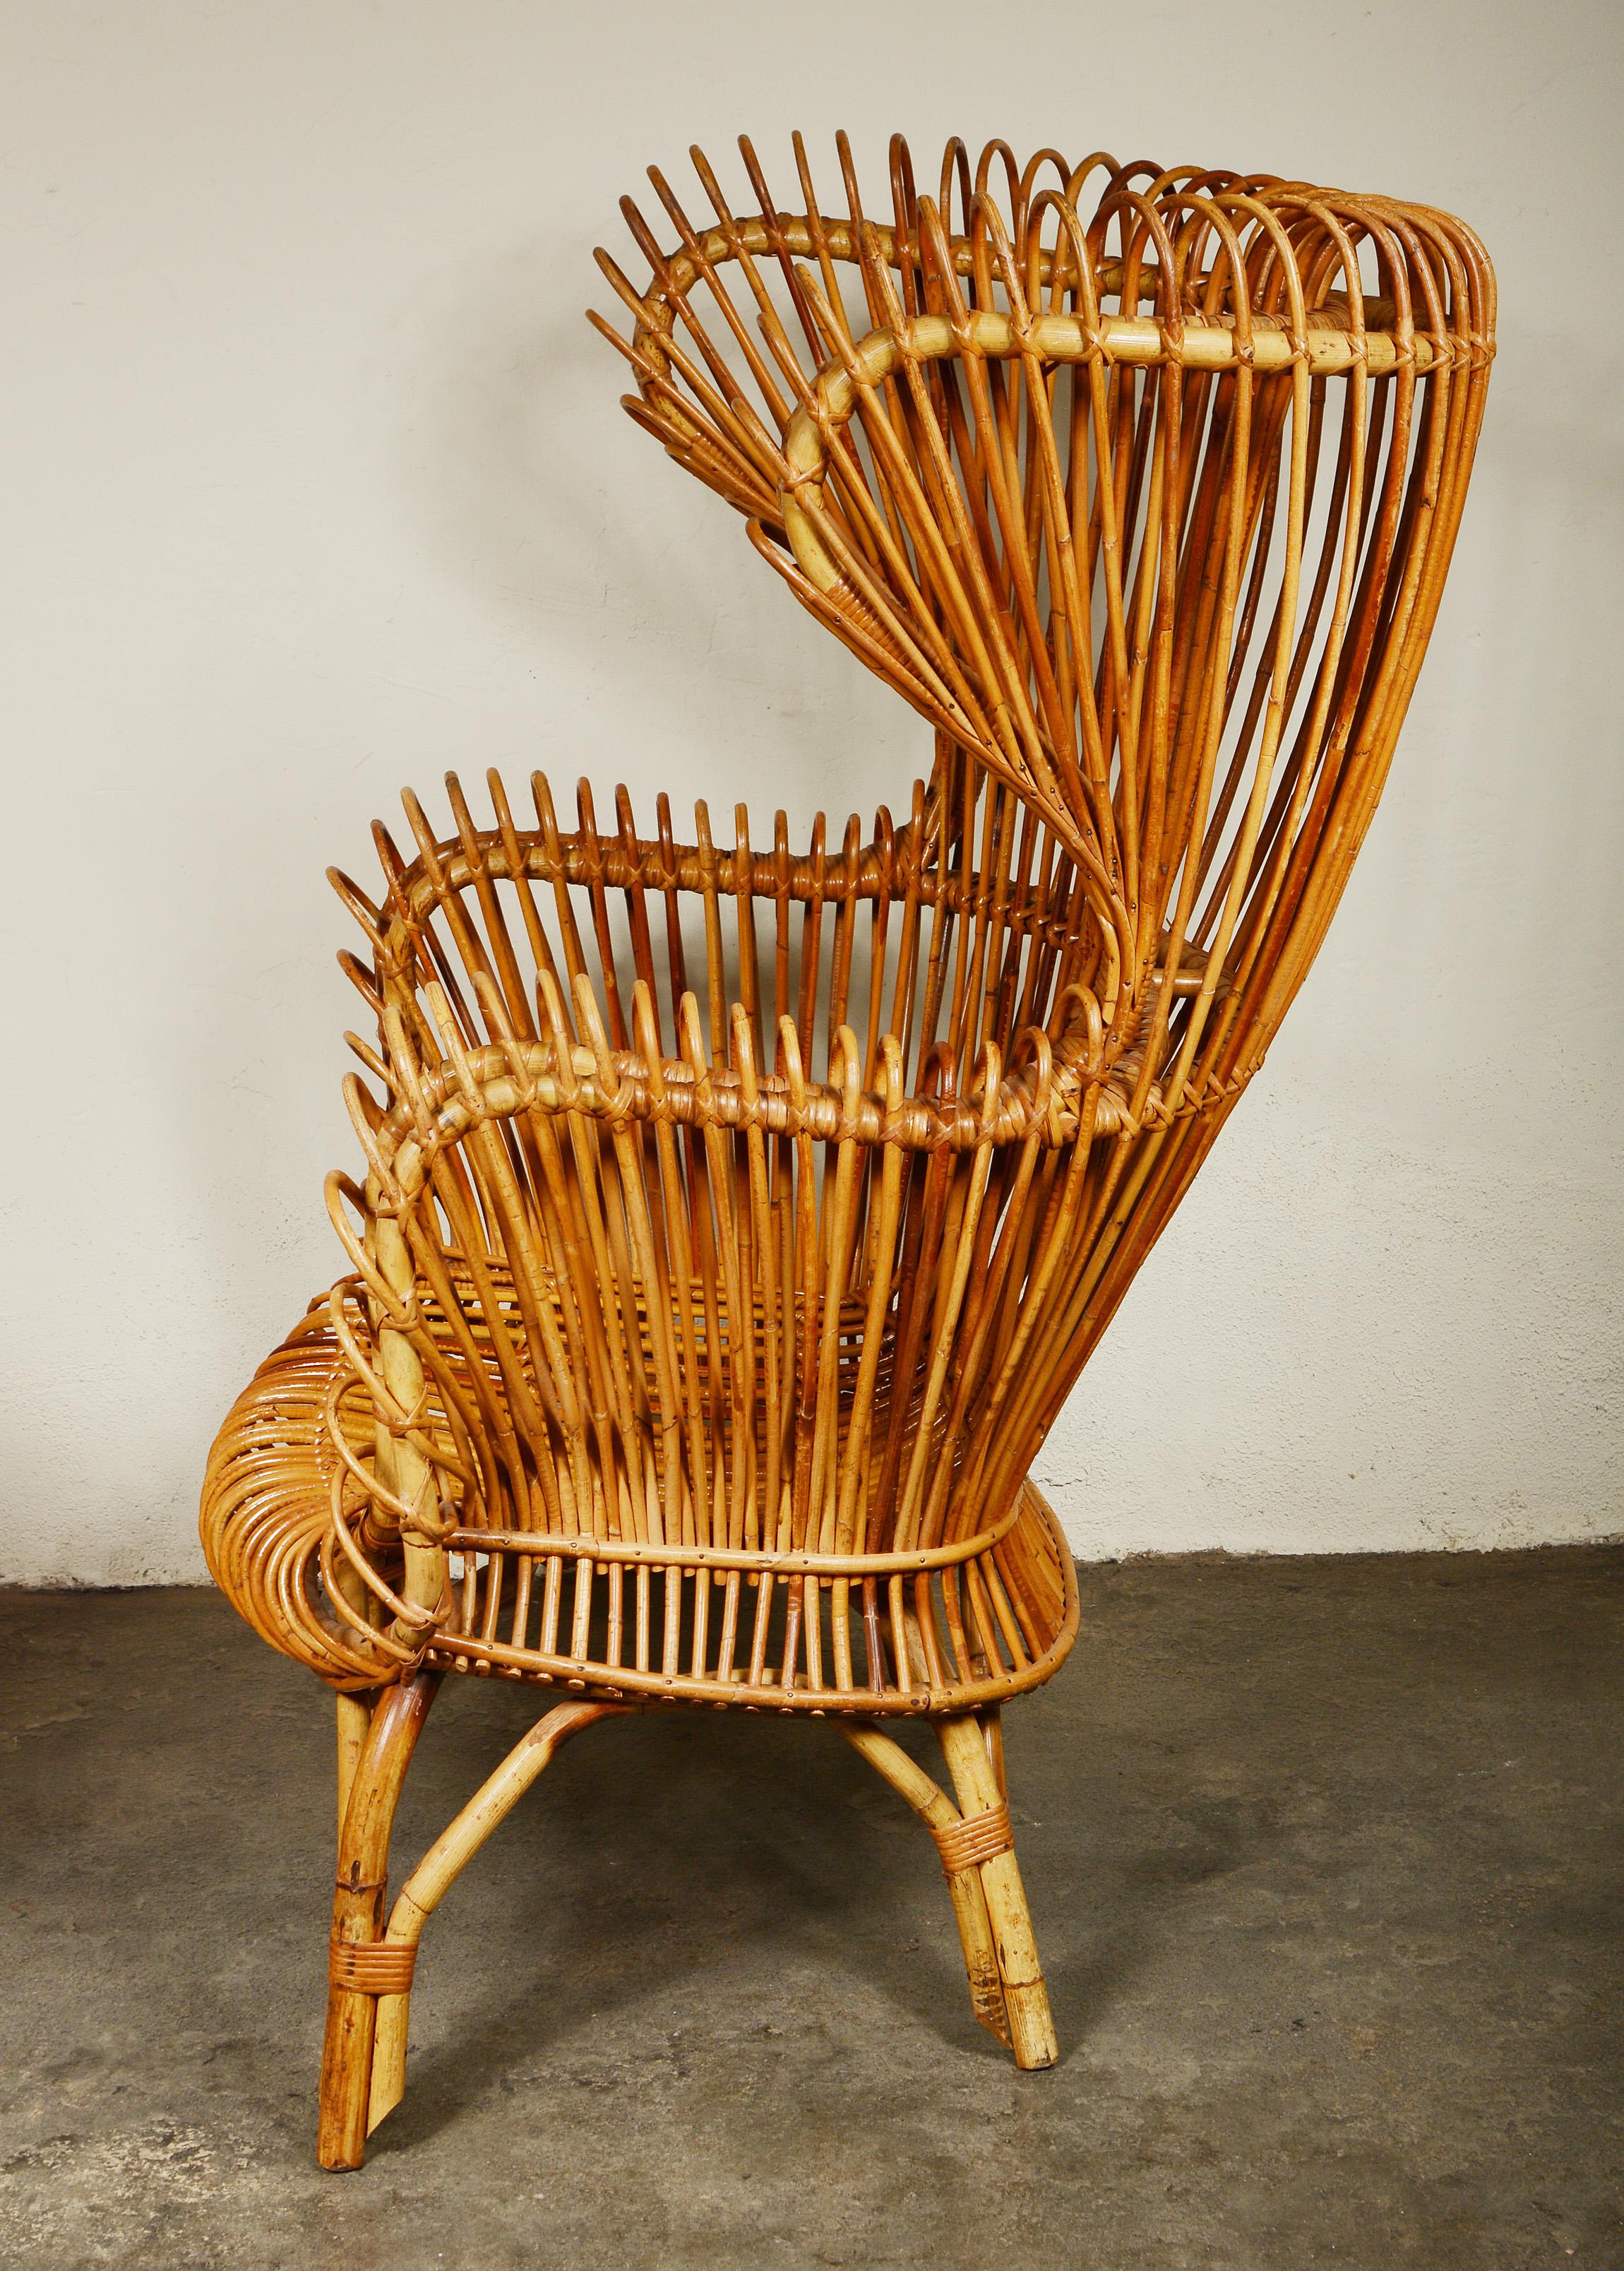 Tall wingback rattan lounge chair. This chair has some of the design elements found in chairs by Franco Albini for Bonacina. The chair is in very good condition. There are three or four small breaks to the wrappings. The chair may have originally